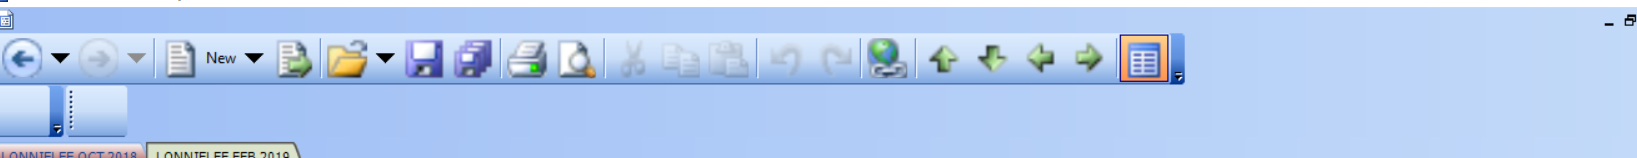 Myinfo Toolbars-no search, text at top.PNG